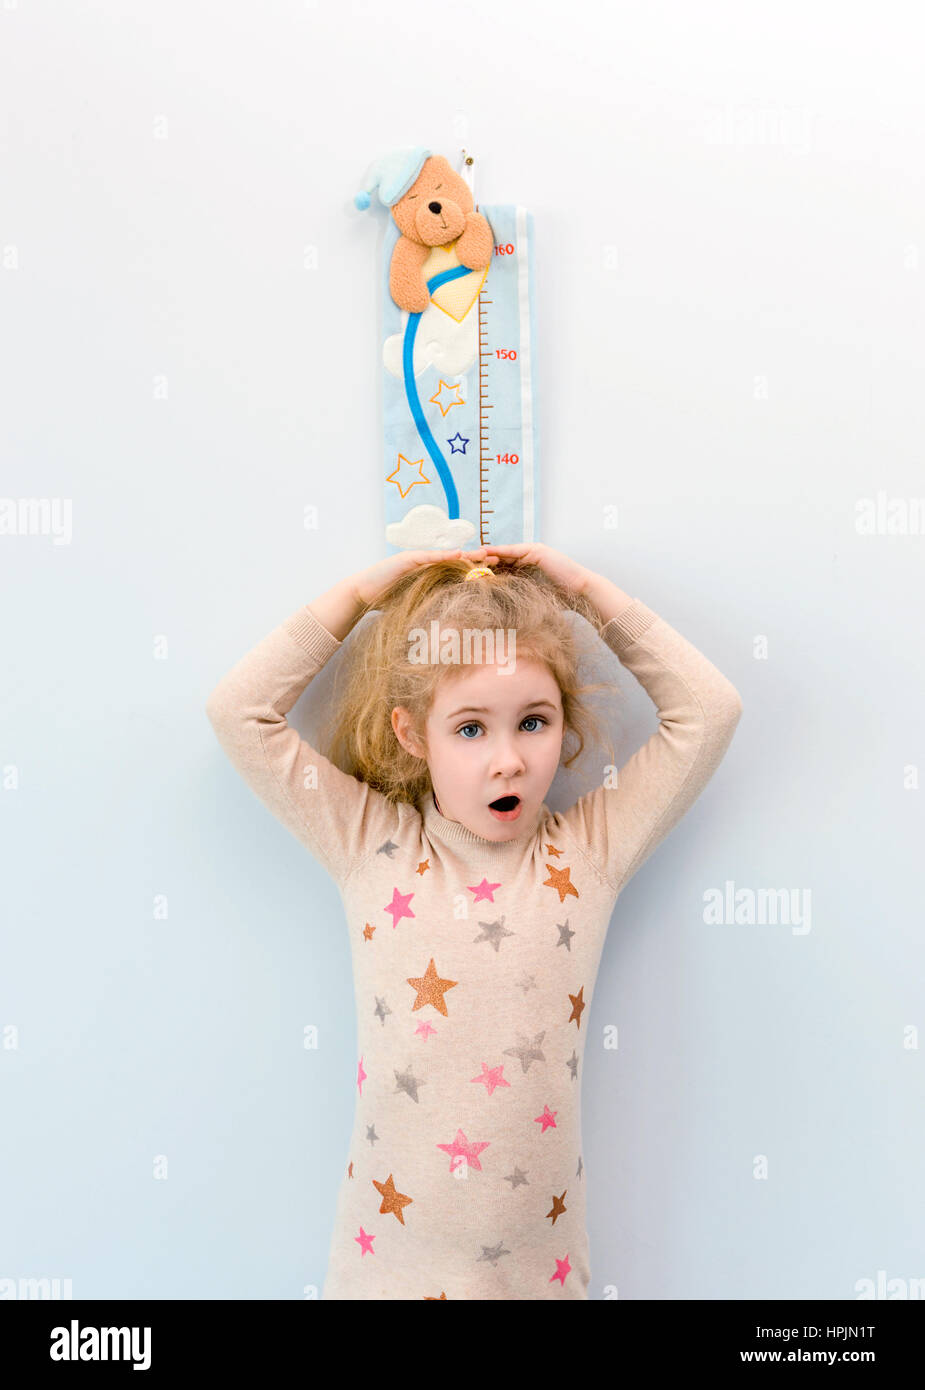 Little blonde girl measuring height against wall in room Stock Photo